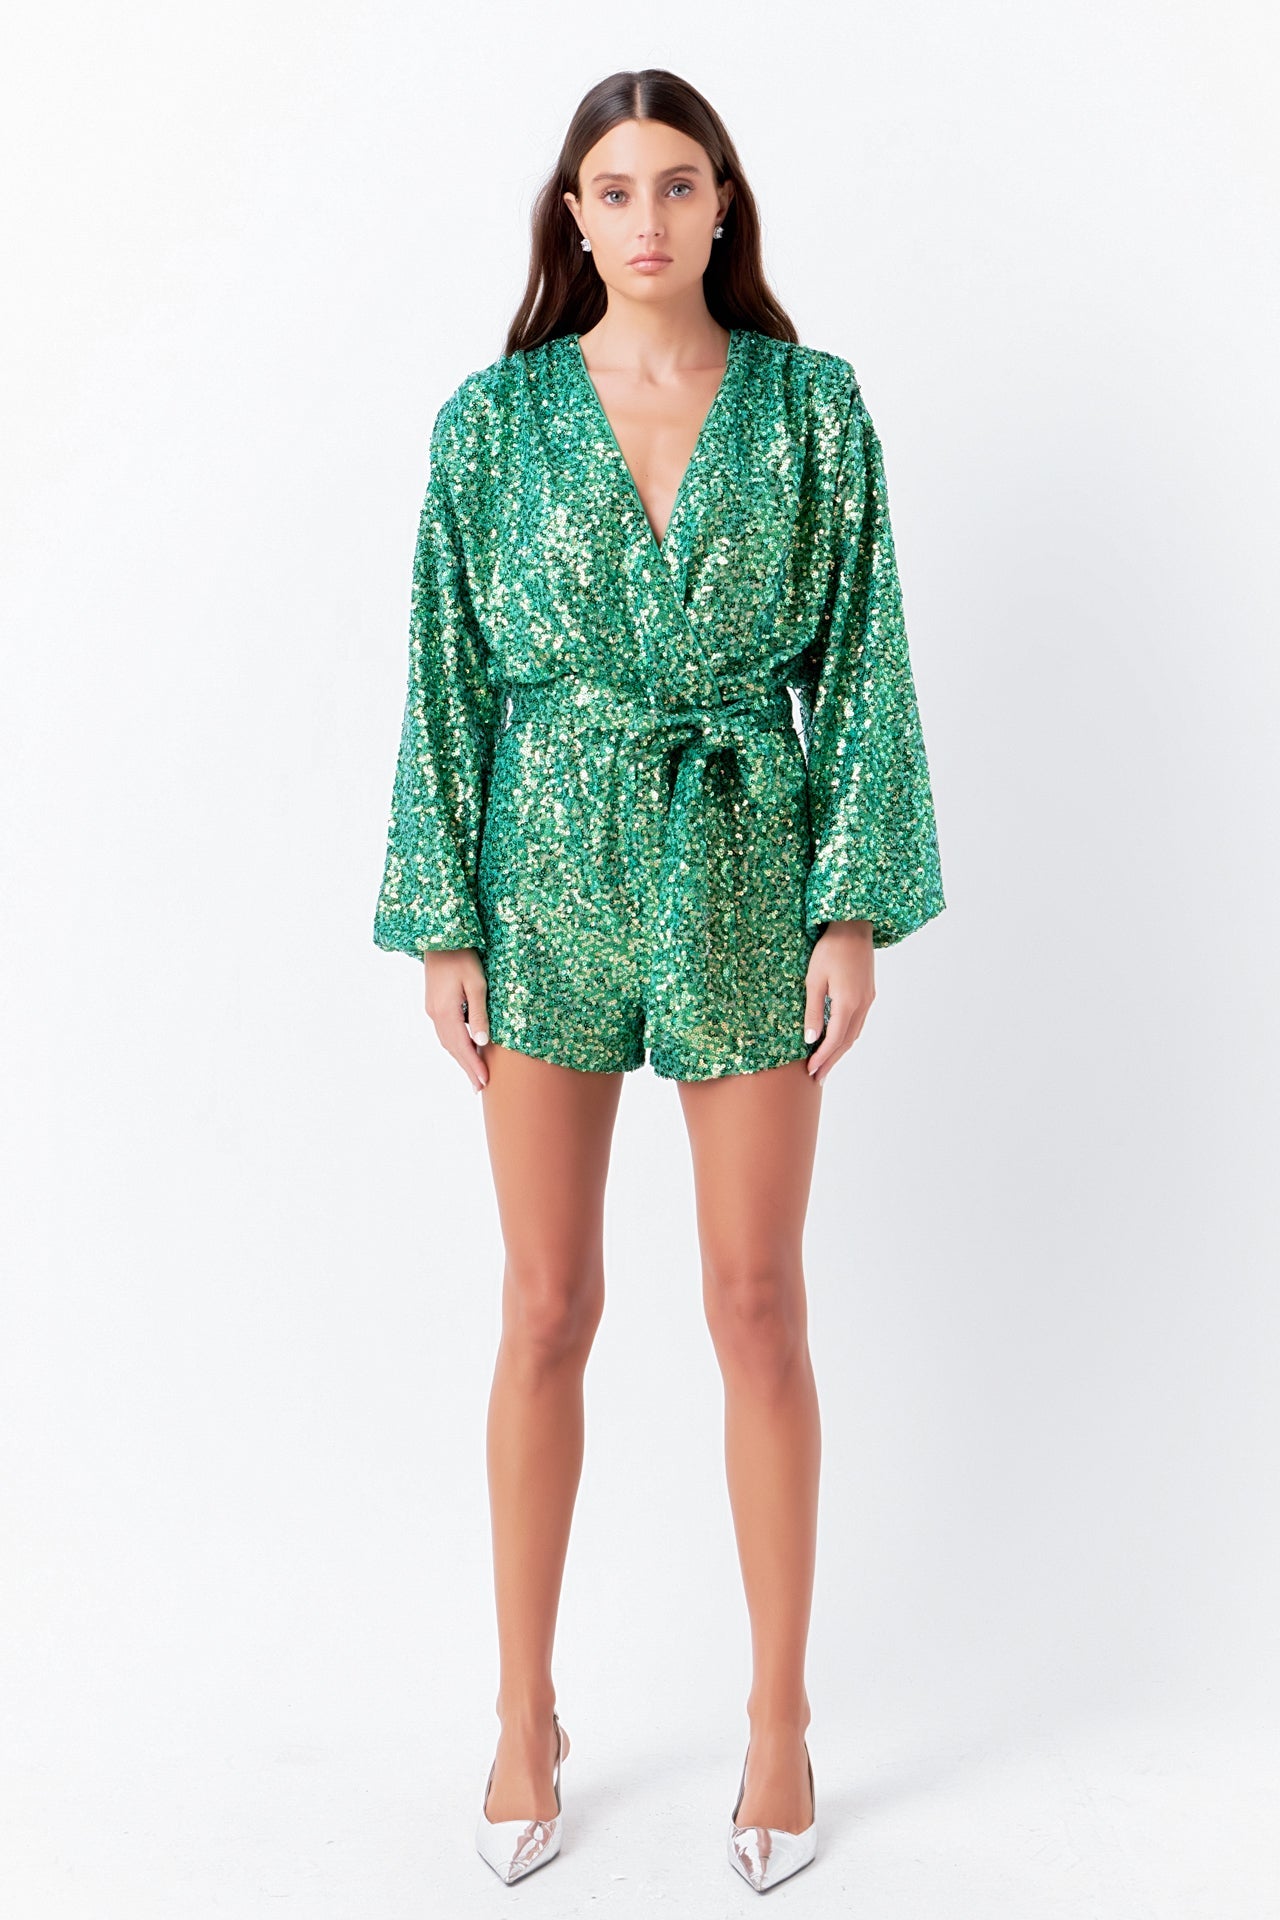 Endless Rose - Sequin Romper - Rompers in Women's Clothing available at endlessrose.com